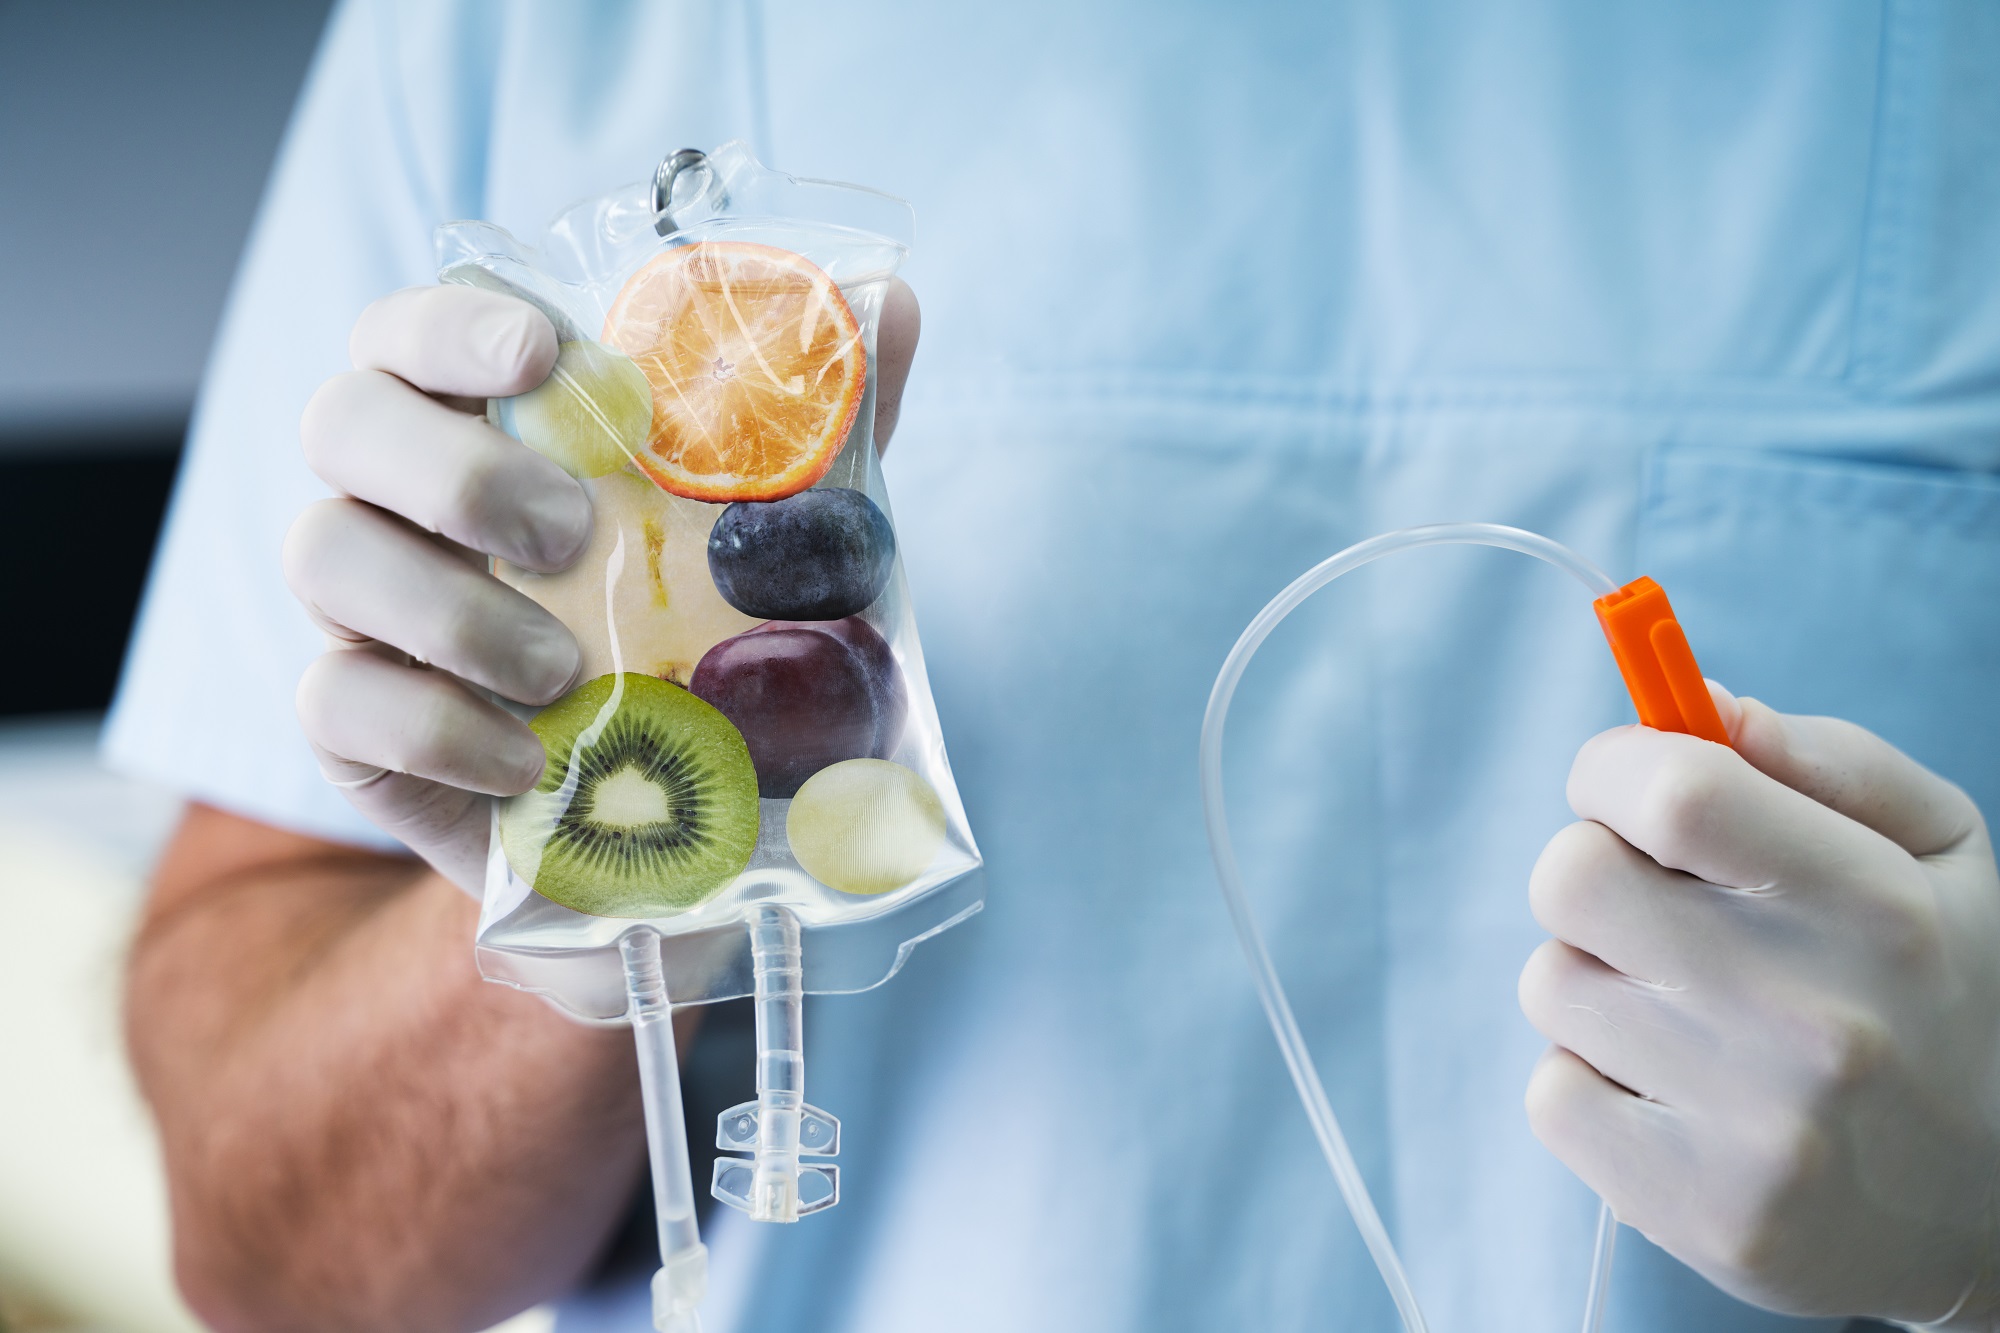 What Are the Benefits of IV Vitamin Infusion?